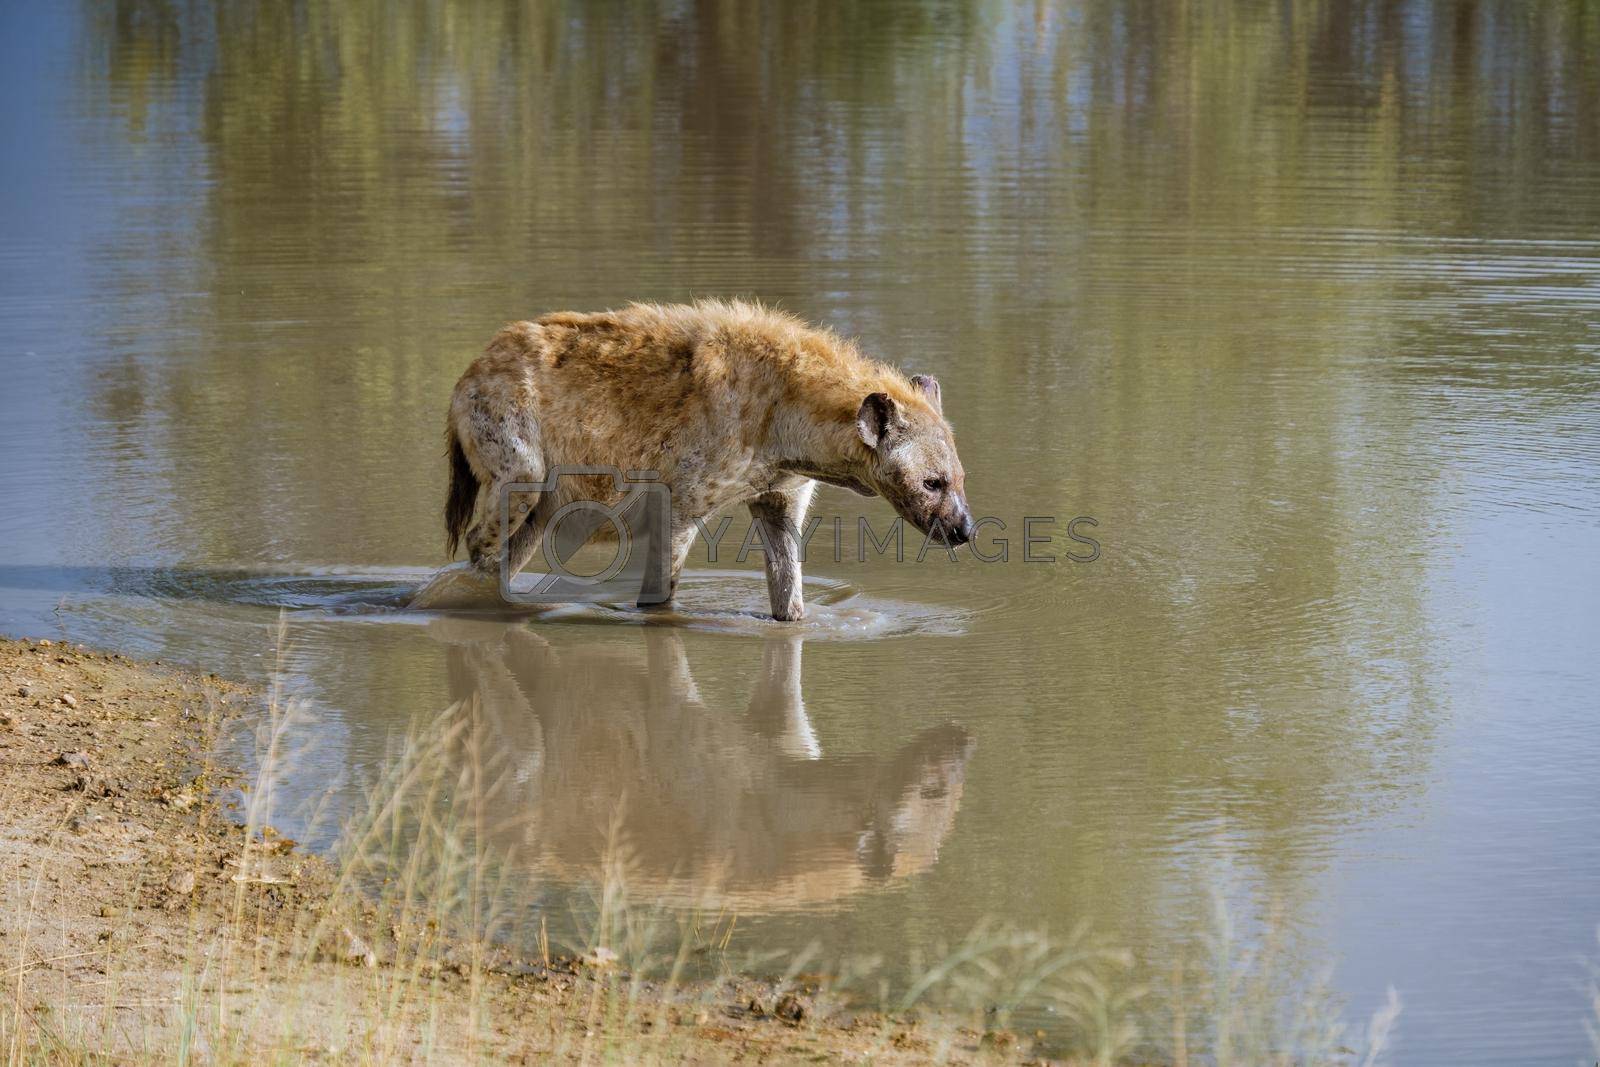 pregnant Hyena, young hyena in Kruger national park South Africa, Hyena family in South Africa.